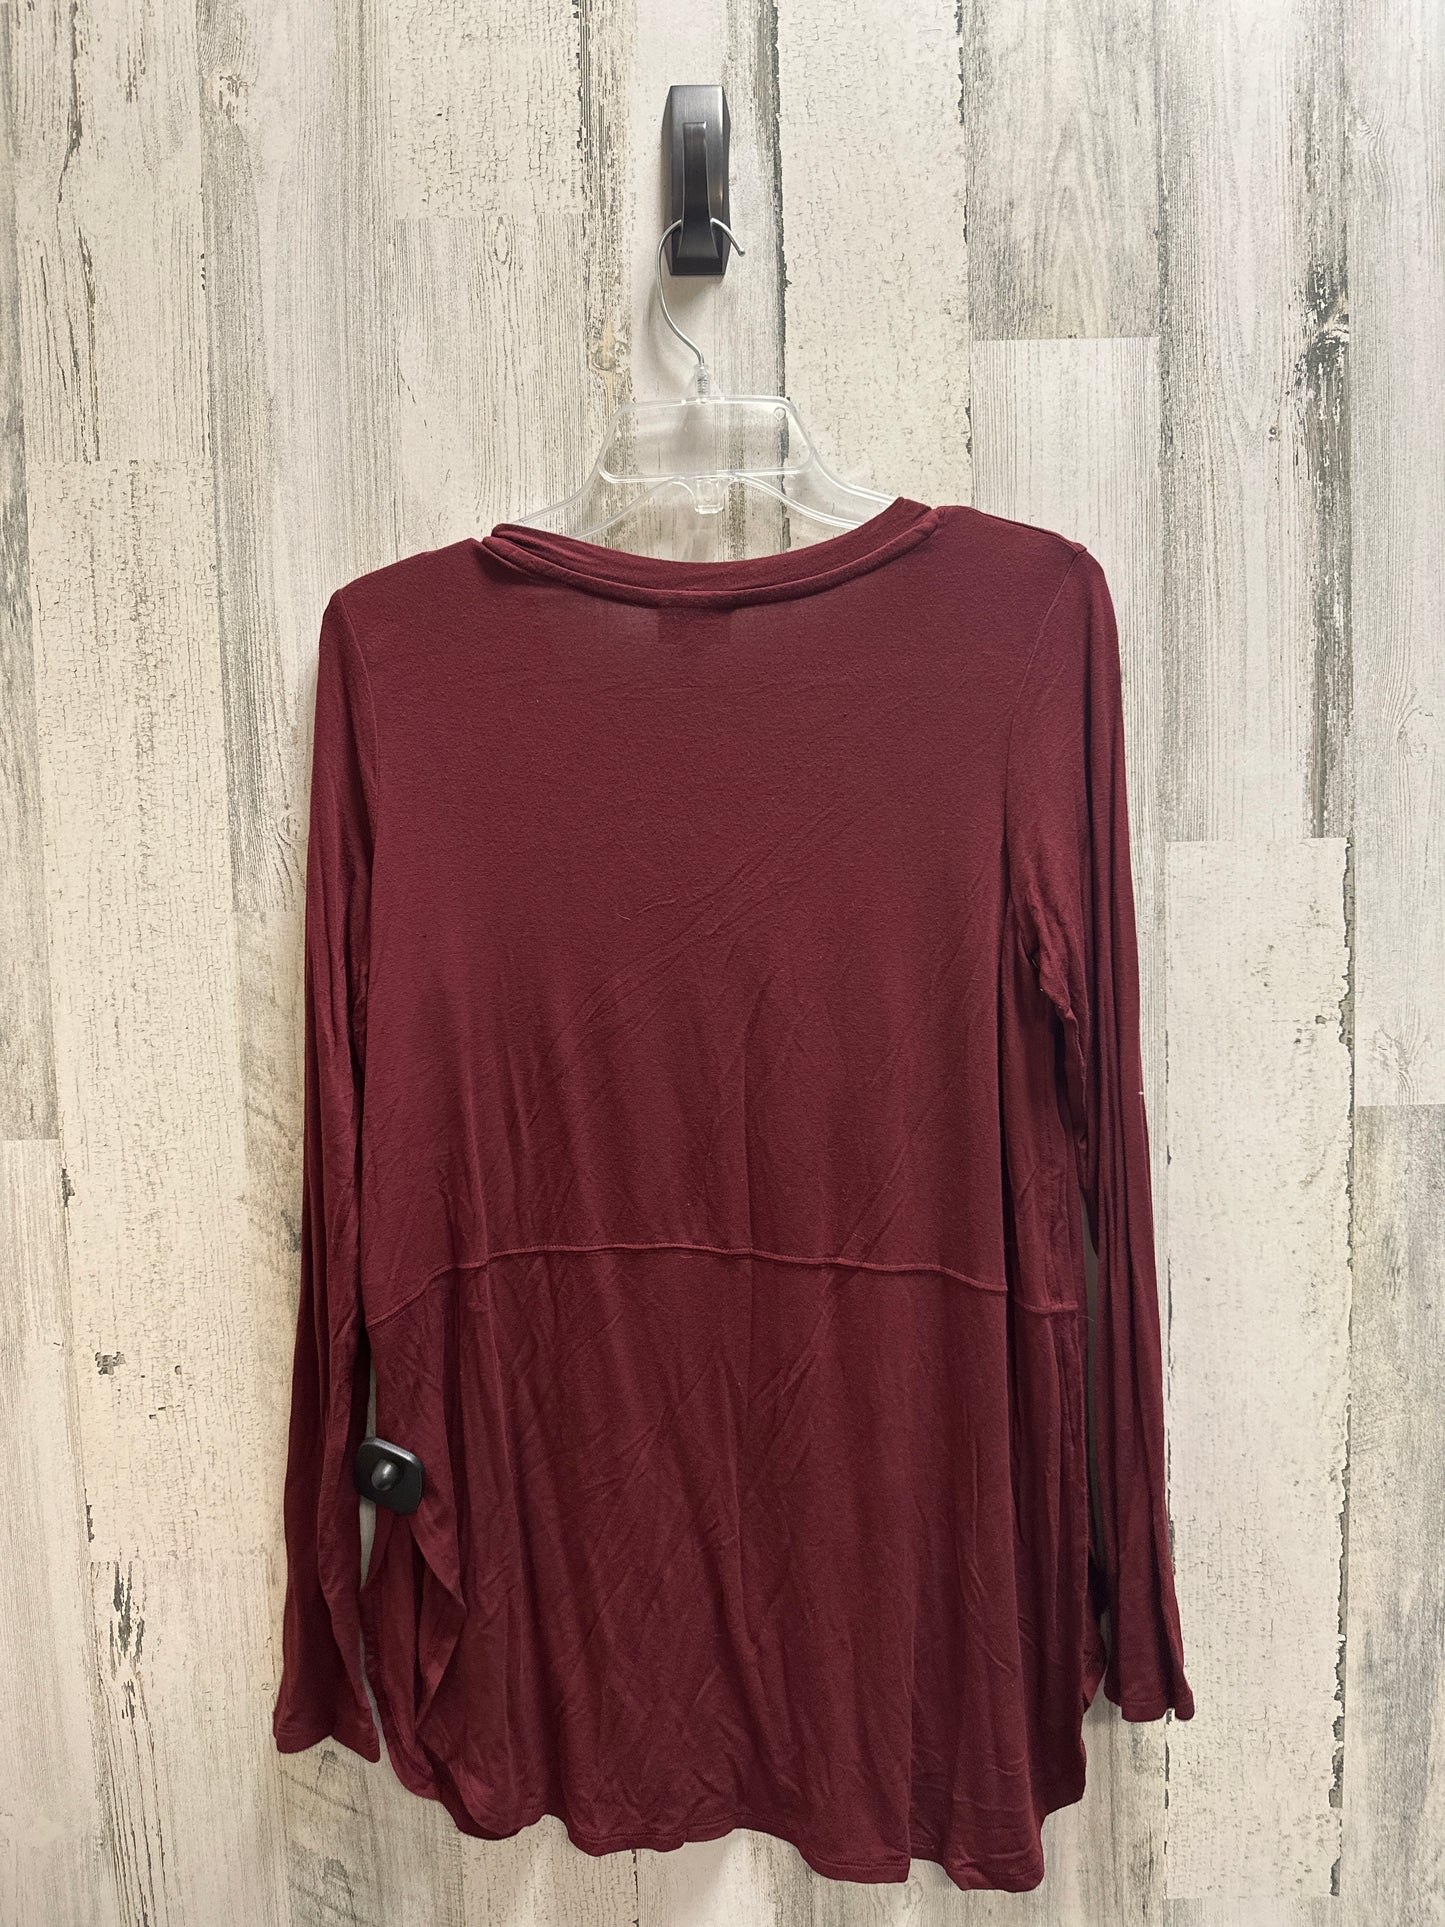 Top Long Sleeve By Mossimo  Size: M